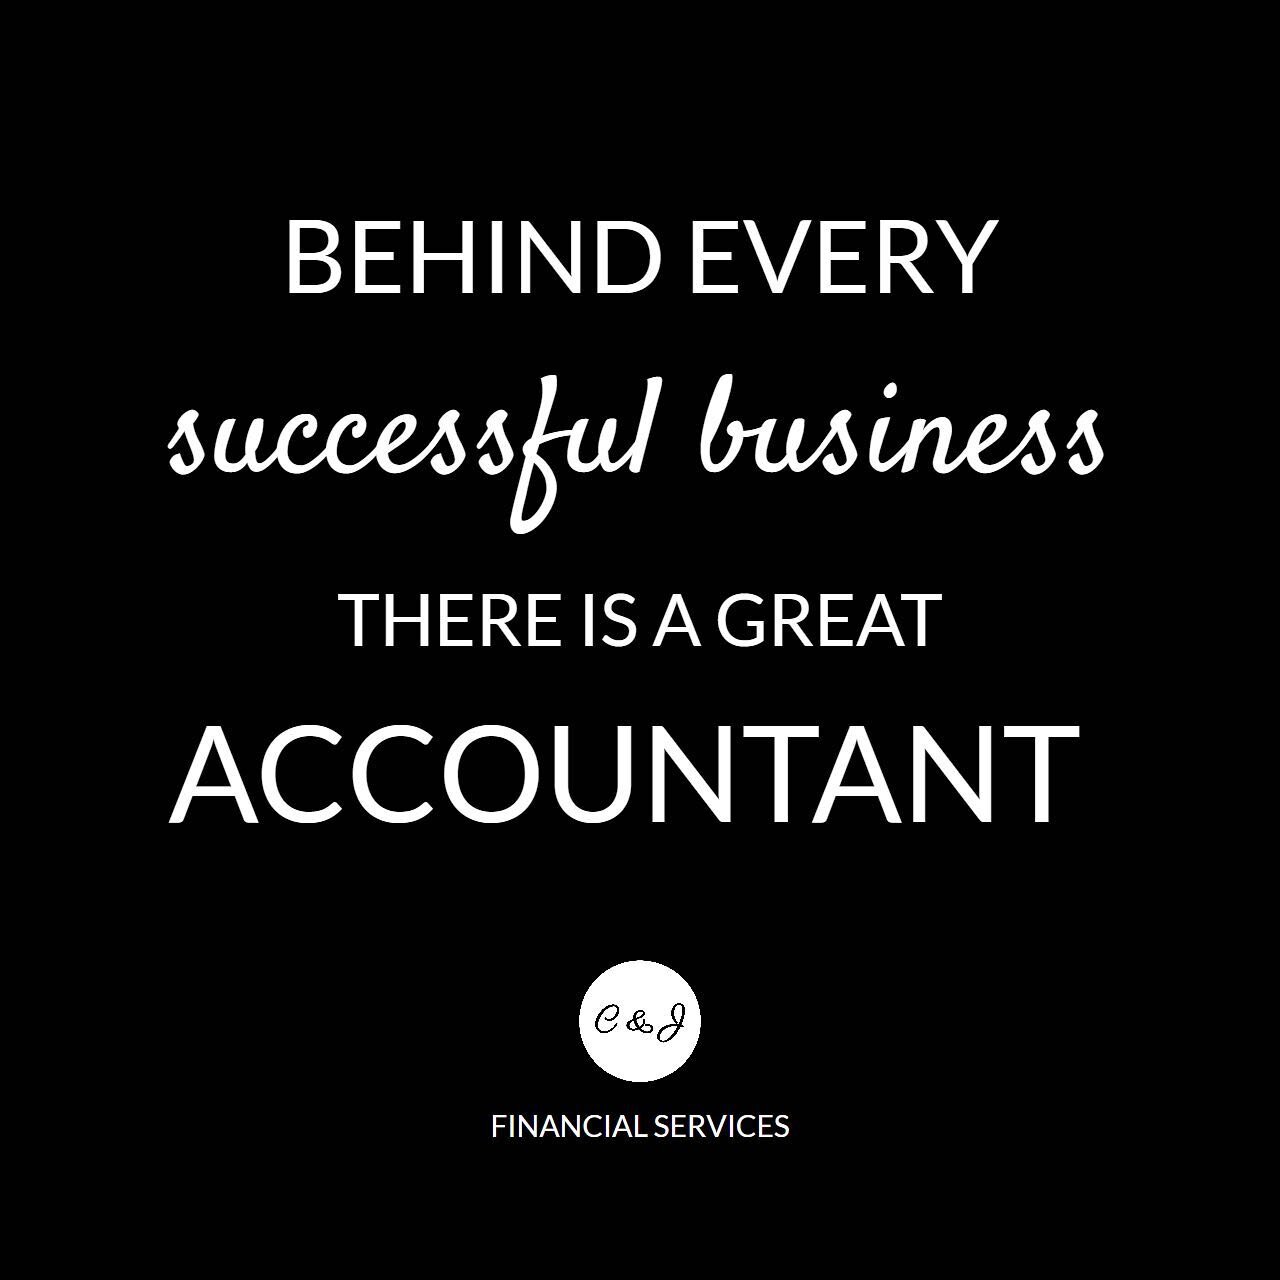 Saw this quote somewhere and as funny as it is, we believe there is some truth to it.  Not to discredit any entrepreneurs&rsquo; hard work and expertise, but great accountants can provide invaluable information that can improve the financial well-bei